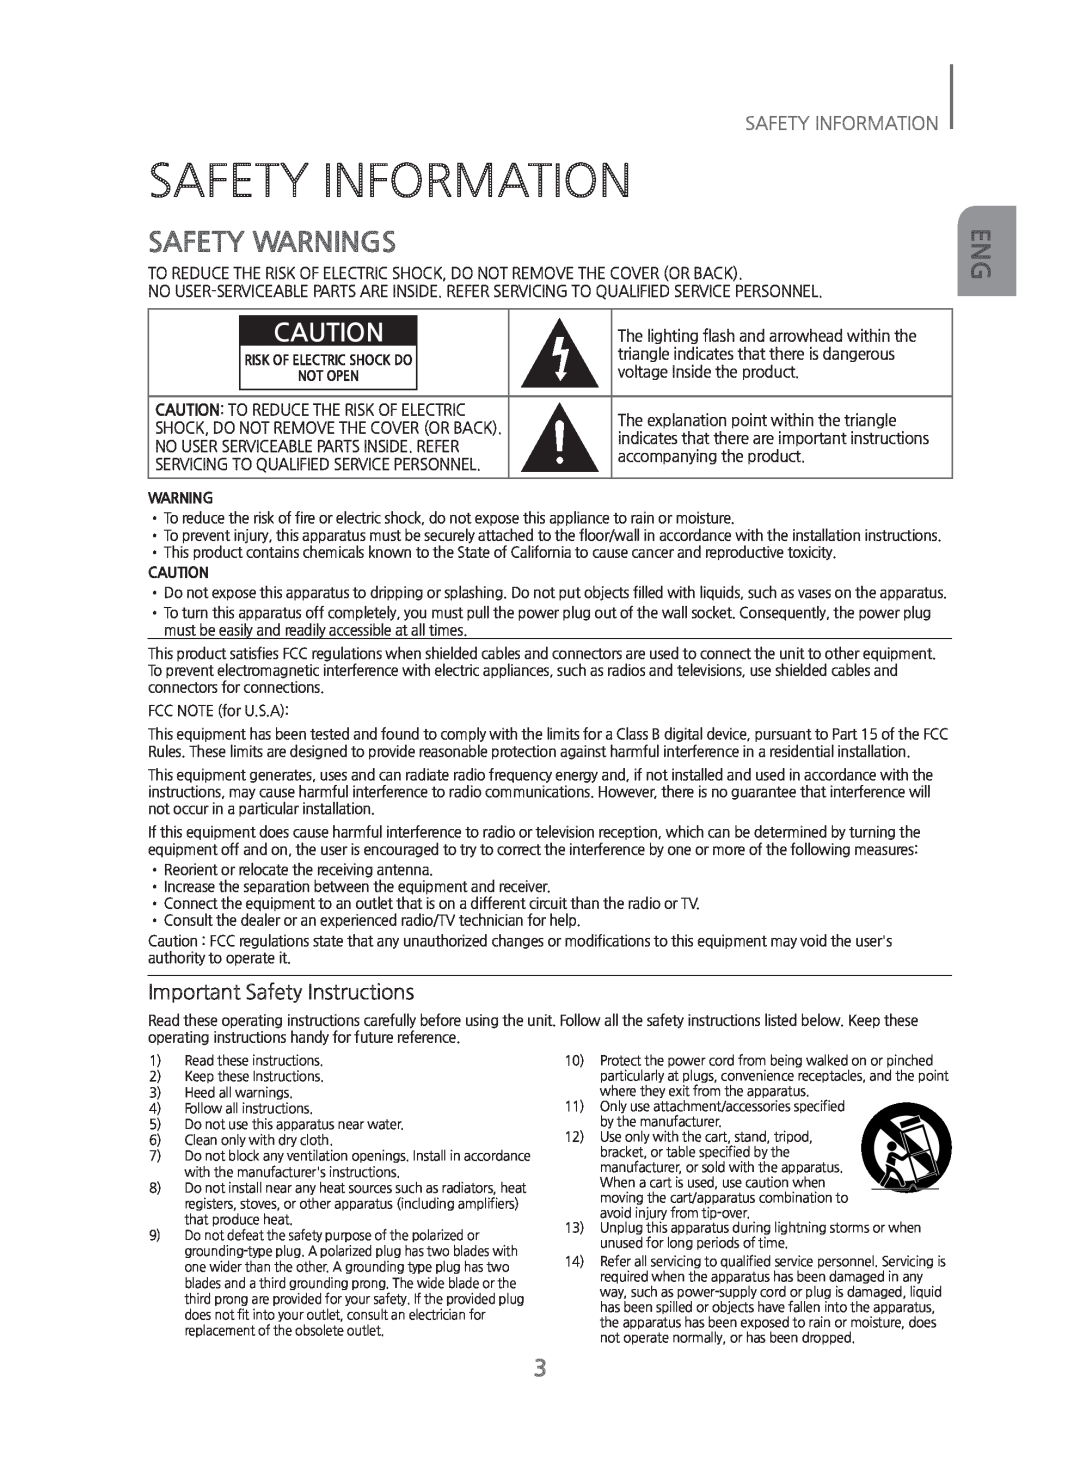 Samsung HW-H450/ZA manual Safety Information, Safety Warnings, Important Safety Instructions 